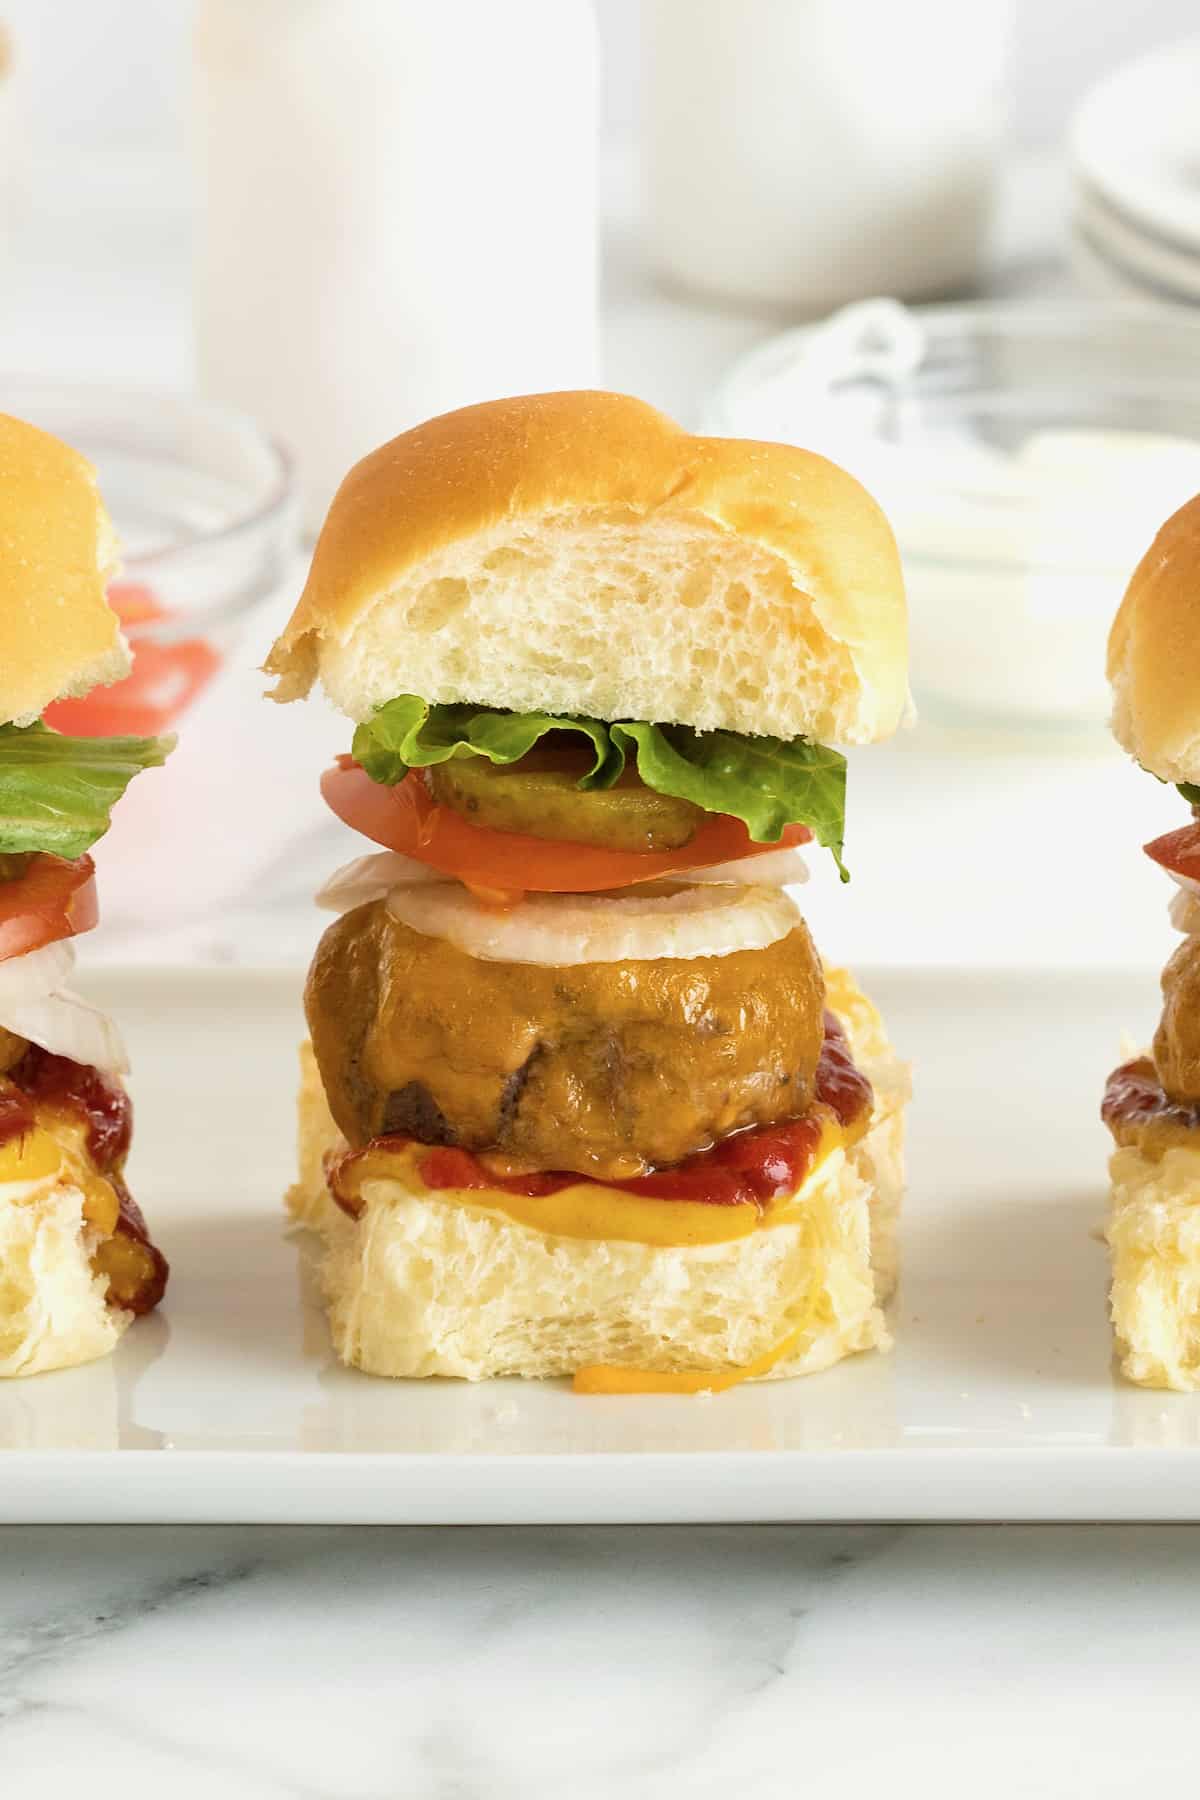 Three mini cheeseburgers with onion, tomato, pickle and lettuce on a white serving plate.